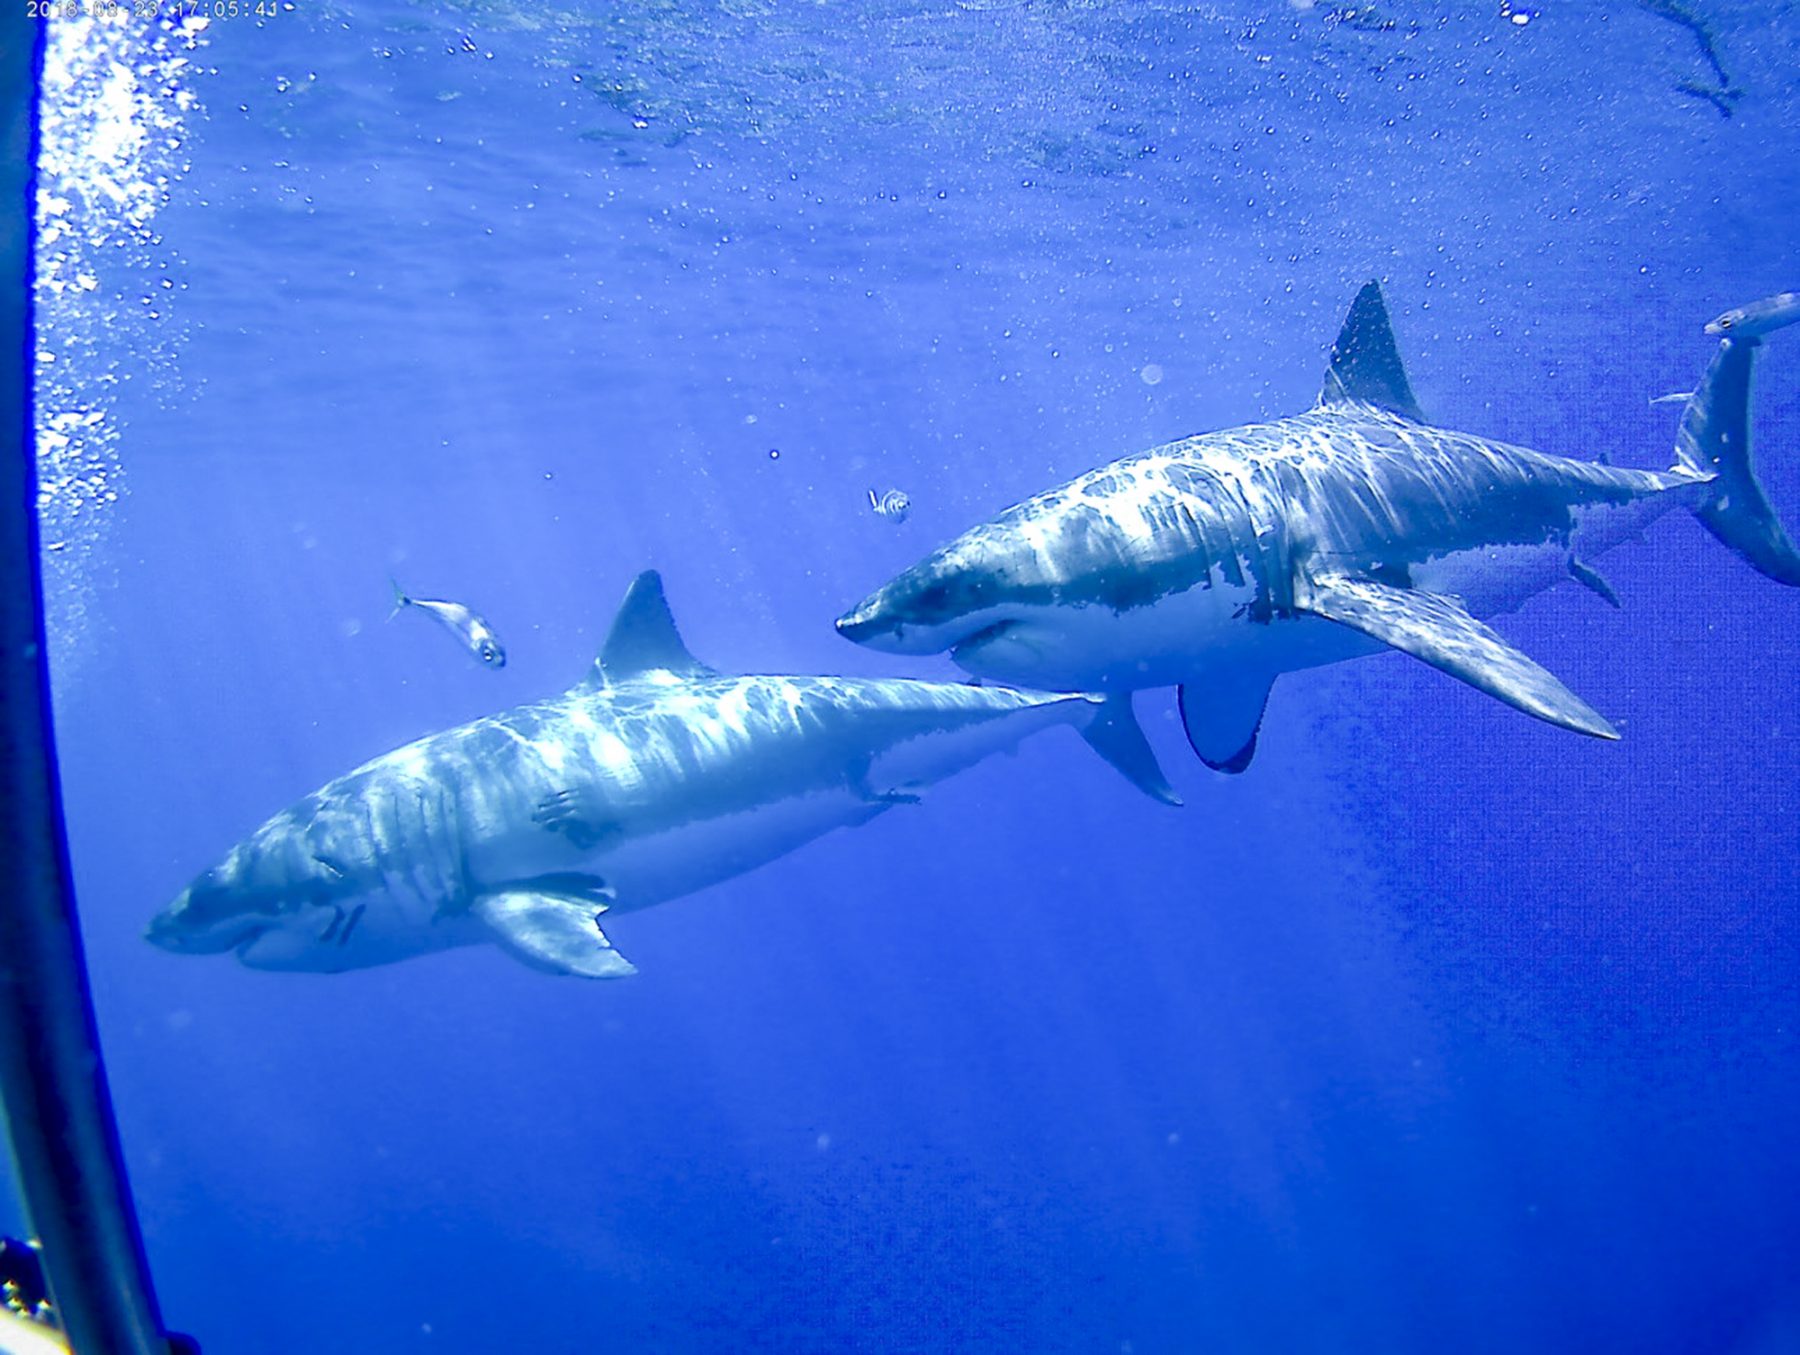 Two great whites at Guadalupe, Photo by Robin Brown